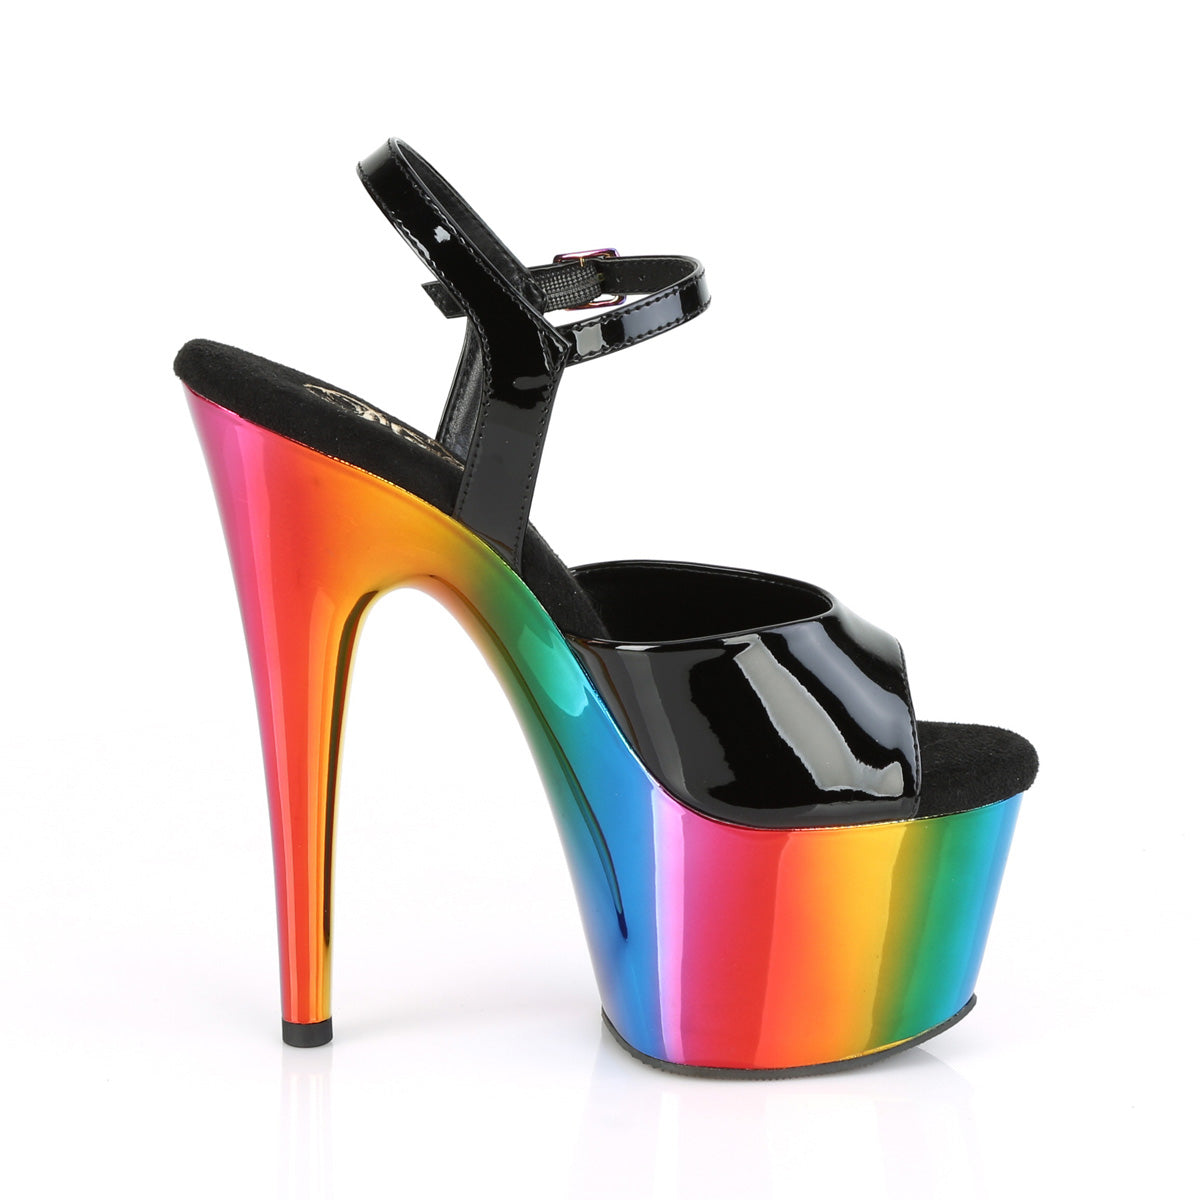 ADORE-709RC Pleaser Pole Dancing Shoes 7 Inch Heel Pleasers - Sexy Shoes Fetish Heels